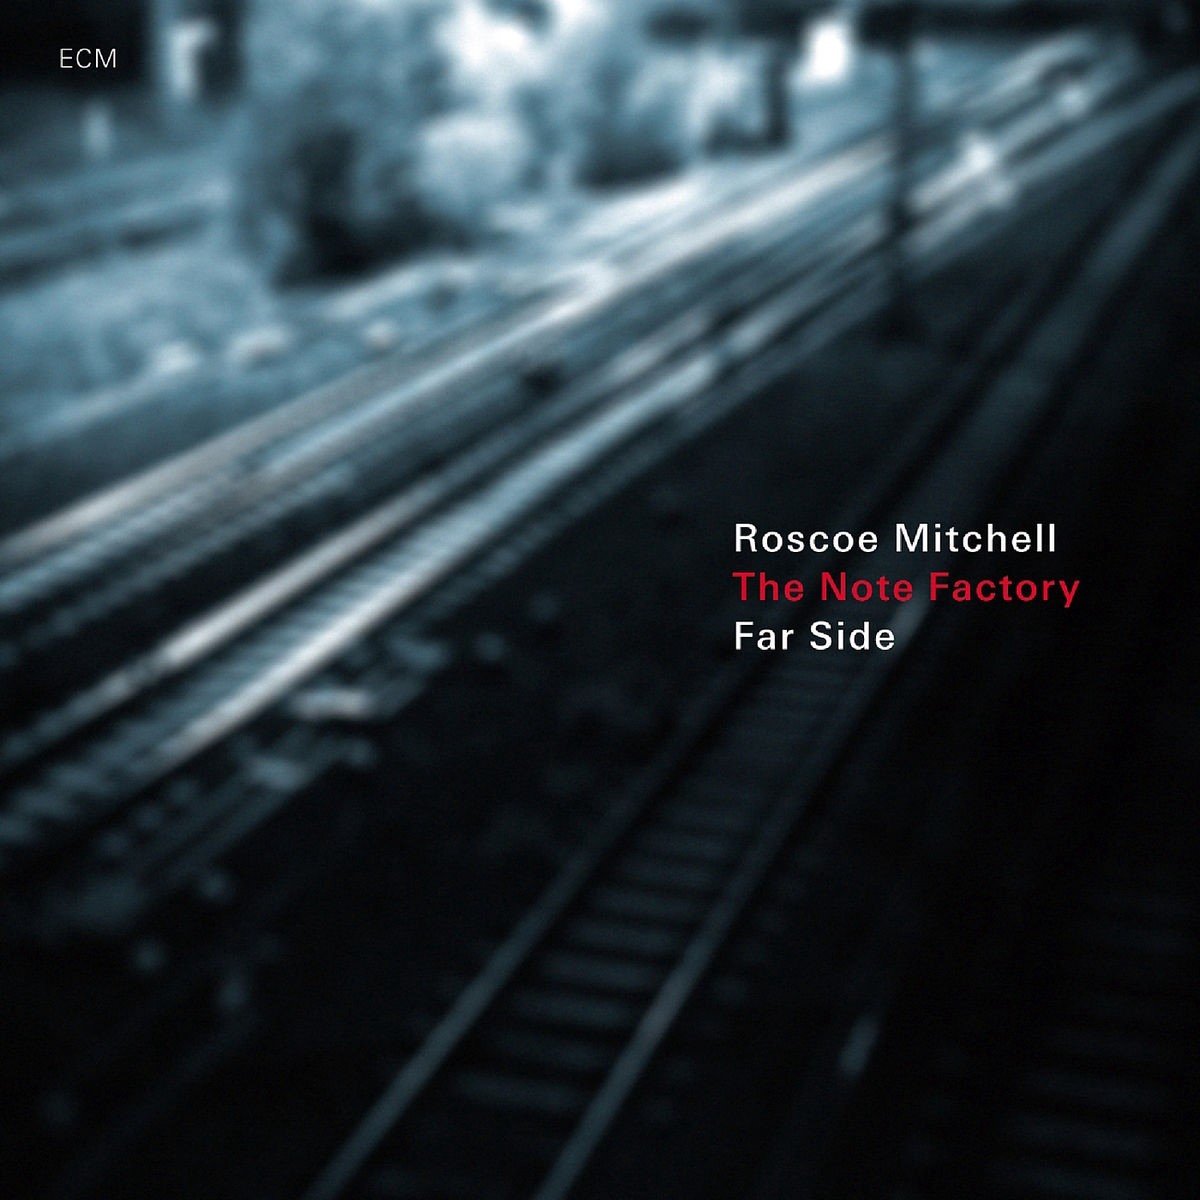 Far Side | Roscoe Mitchell, The Note Factory